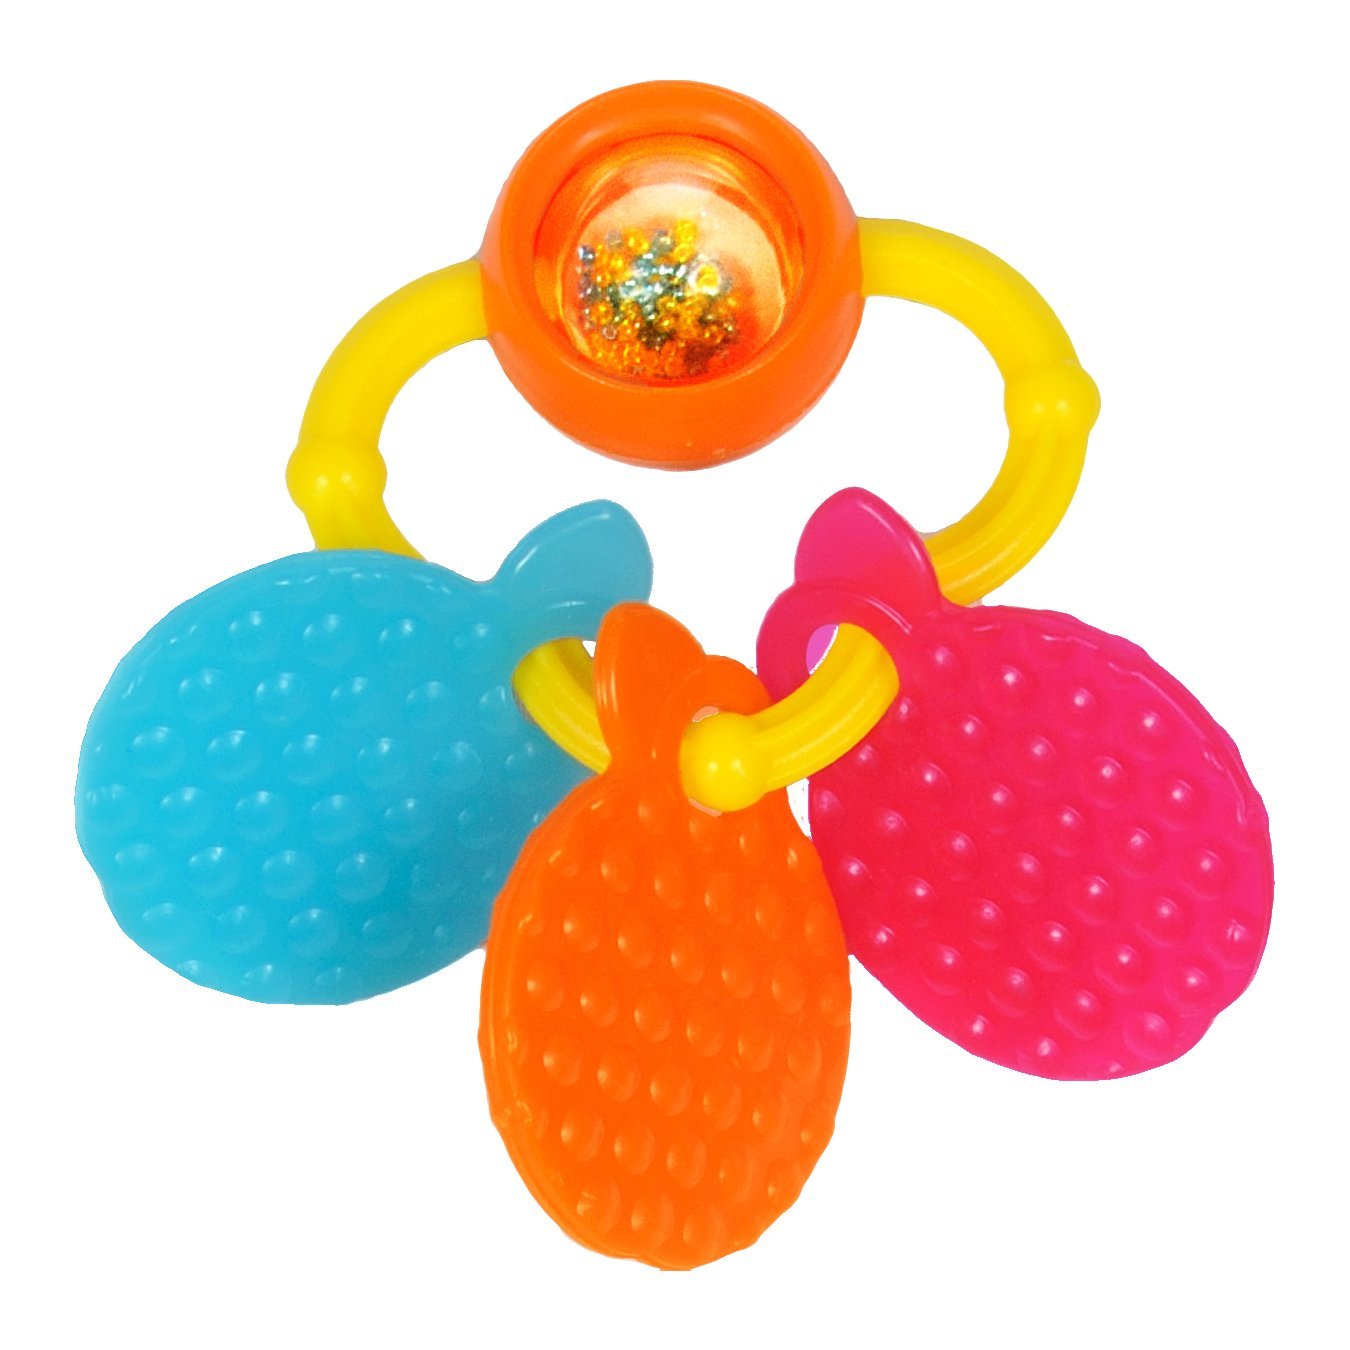 Giggles - Orange Teether, Teether for Babies to sooth their gums, Easy to Grasp and chew with rattle sounds, 3